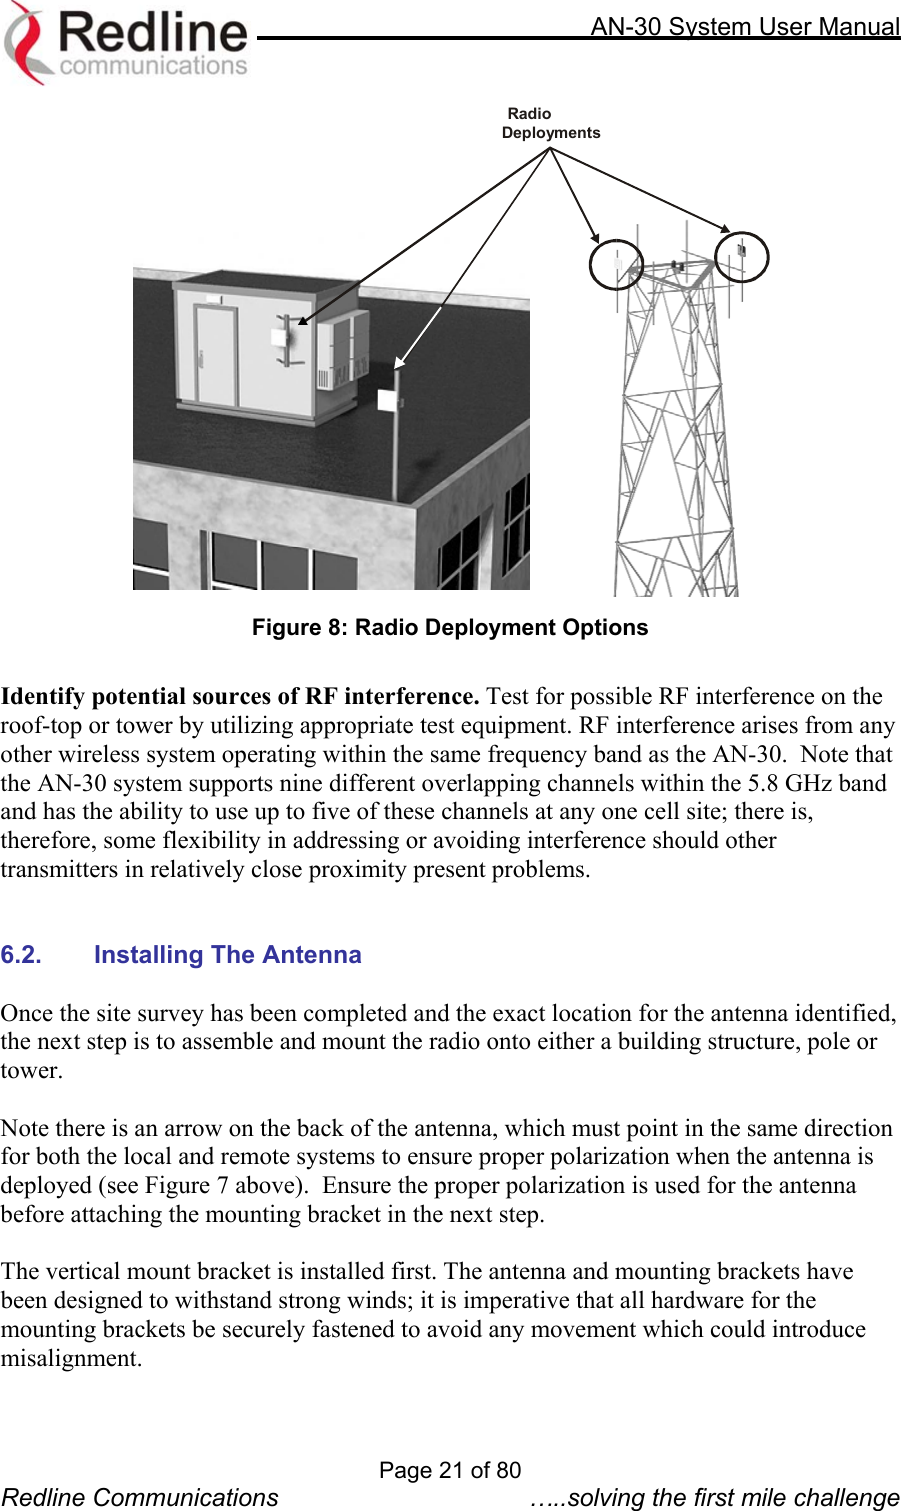     AN-30 System User Manual   RadioDeployments Figure 8: Radio Deployment Options  Identify potential sources of RF interference. Test for possible RF interference on the roof-top or tower by utilizing appropriate test equipment. RF interference arises from any other wireless system operating within the same frequency band as the AN-30.  Note that the AN-30 system supports nine different overlapping channels within the 5.8 GHz band and has the ability to use up to five of these channels at any one cell site; there is, therefore, some flexibility in addressing or avoiding interference should other transmitters in relatively close proximity present problems.       6.2.  Installing The Antenna   Once the site survey has been completed and the exact location for the antenna identified, the next step is to assemble and mount the radio onto either a building structure, pole or tower.   Note there is an arrow on the back of the antenna, which must point in the same direction for both the local and remote systems to ensure proper polarization when the antenna is deployed (see Figure 7 above).  Ensure the proper polarization is used for the antenna before attaching the mounting bracket in the next step.  The vertical mount bracket is installed first. The antenna and mounting brackets have been designed to withstand strong winds; it is imperative that all hardware for the mounting brackets be securely fastened to avoid any movement which could introduce misalignment.   Page 21 of 80 Redline Communications  …..solving the first mile challenge 